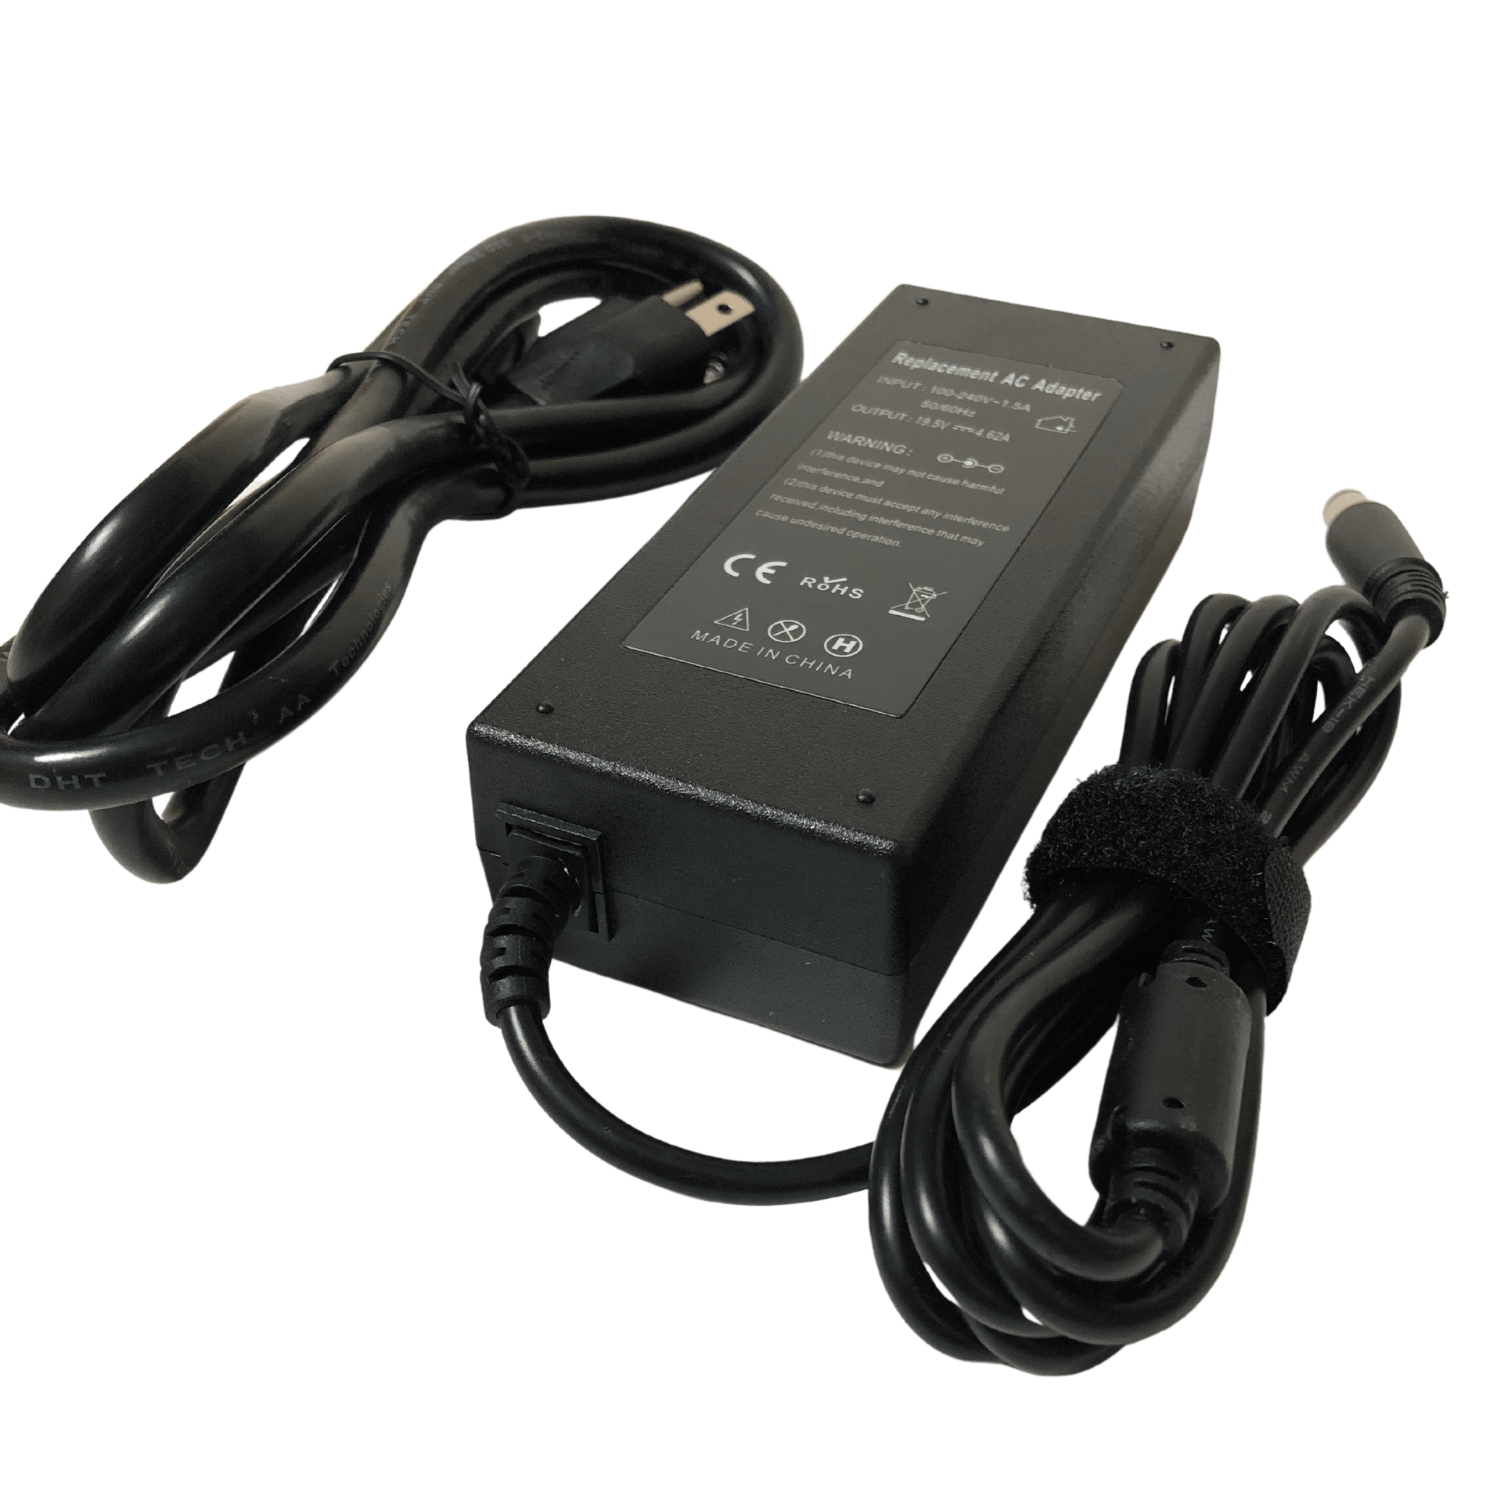 Replacement 90W Laptop Charger fat pin for Dell Inspiron 14 15 17, XPS, Chromebook 11 , Power cord included